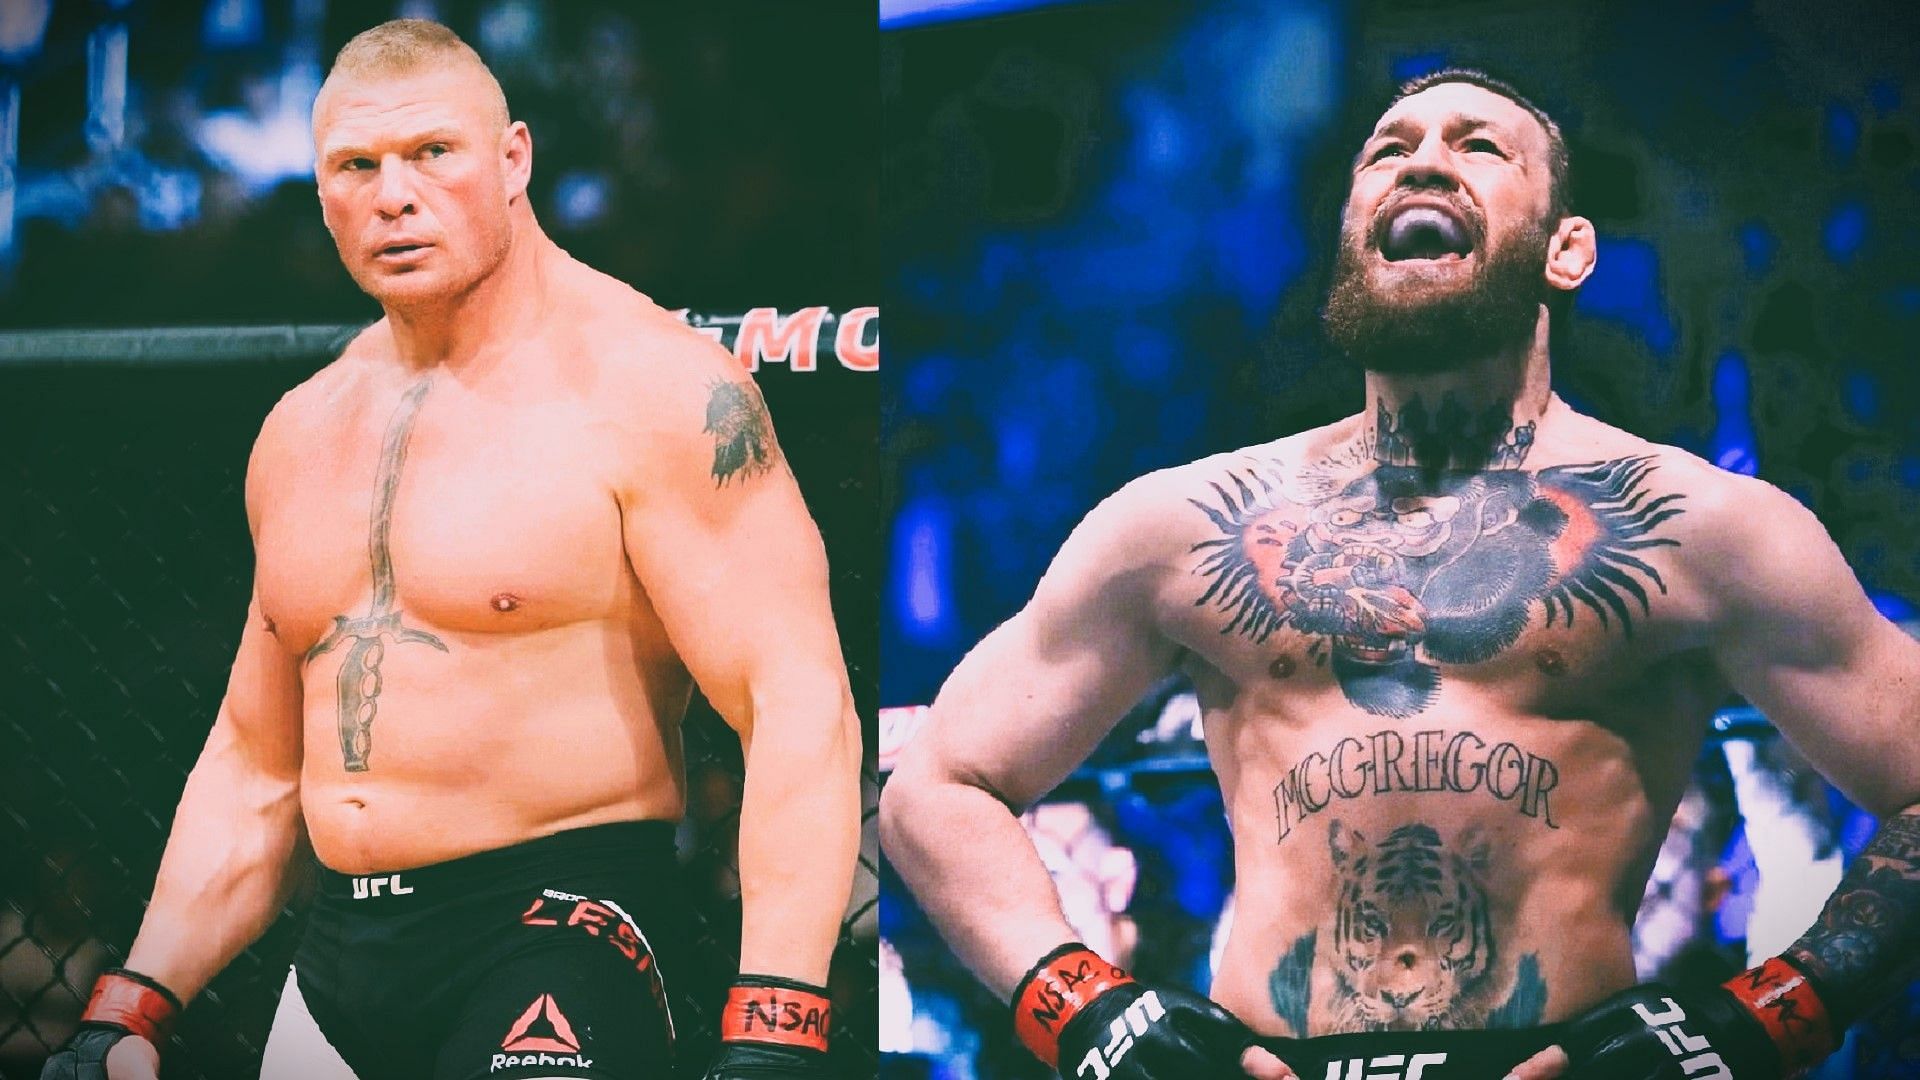 Brock Lesnar and Conor McGregor